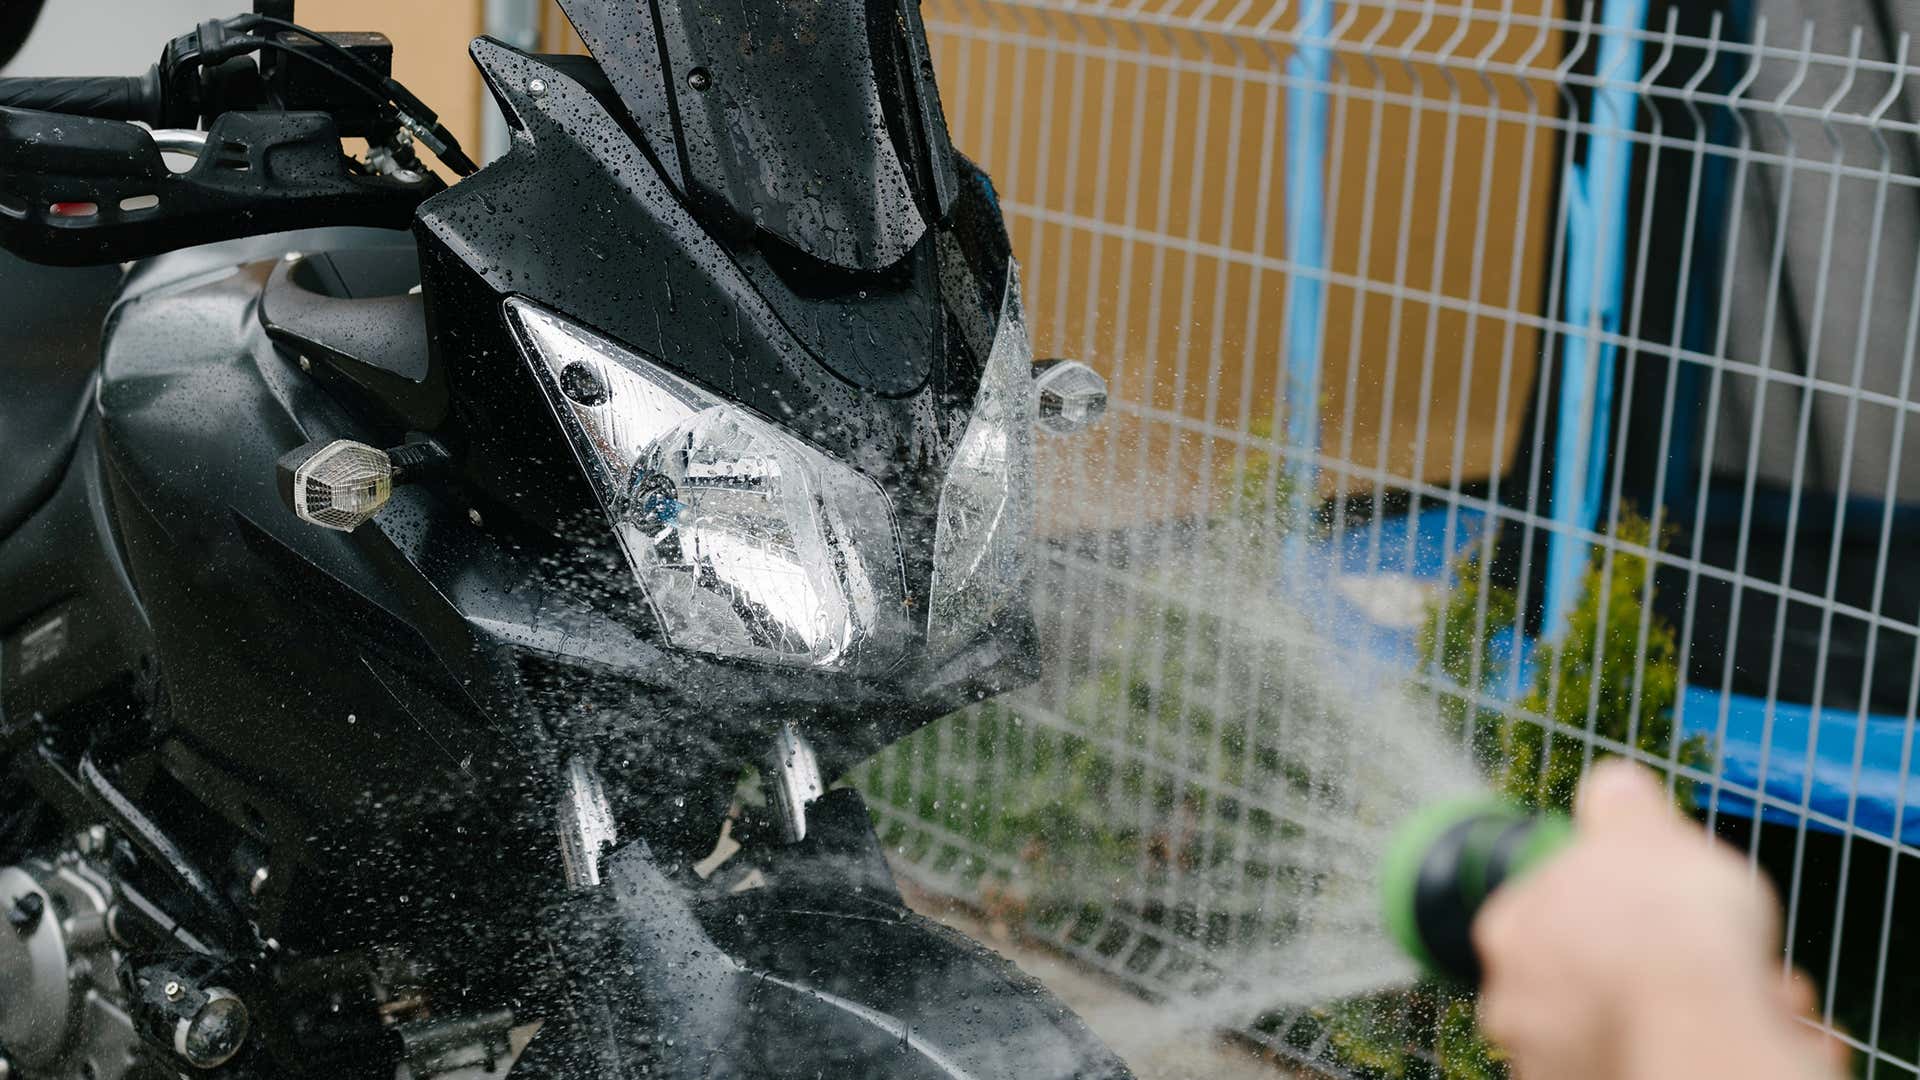 Be careful around seals and electronics when cleaning your motorcycle with a high-pressure water source.